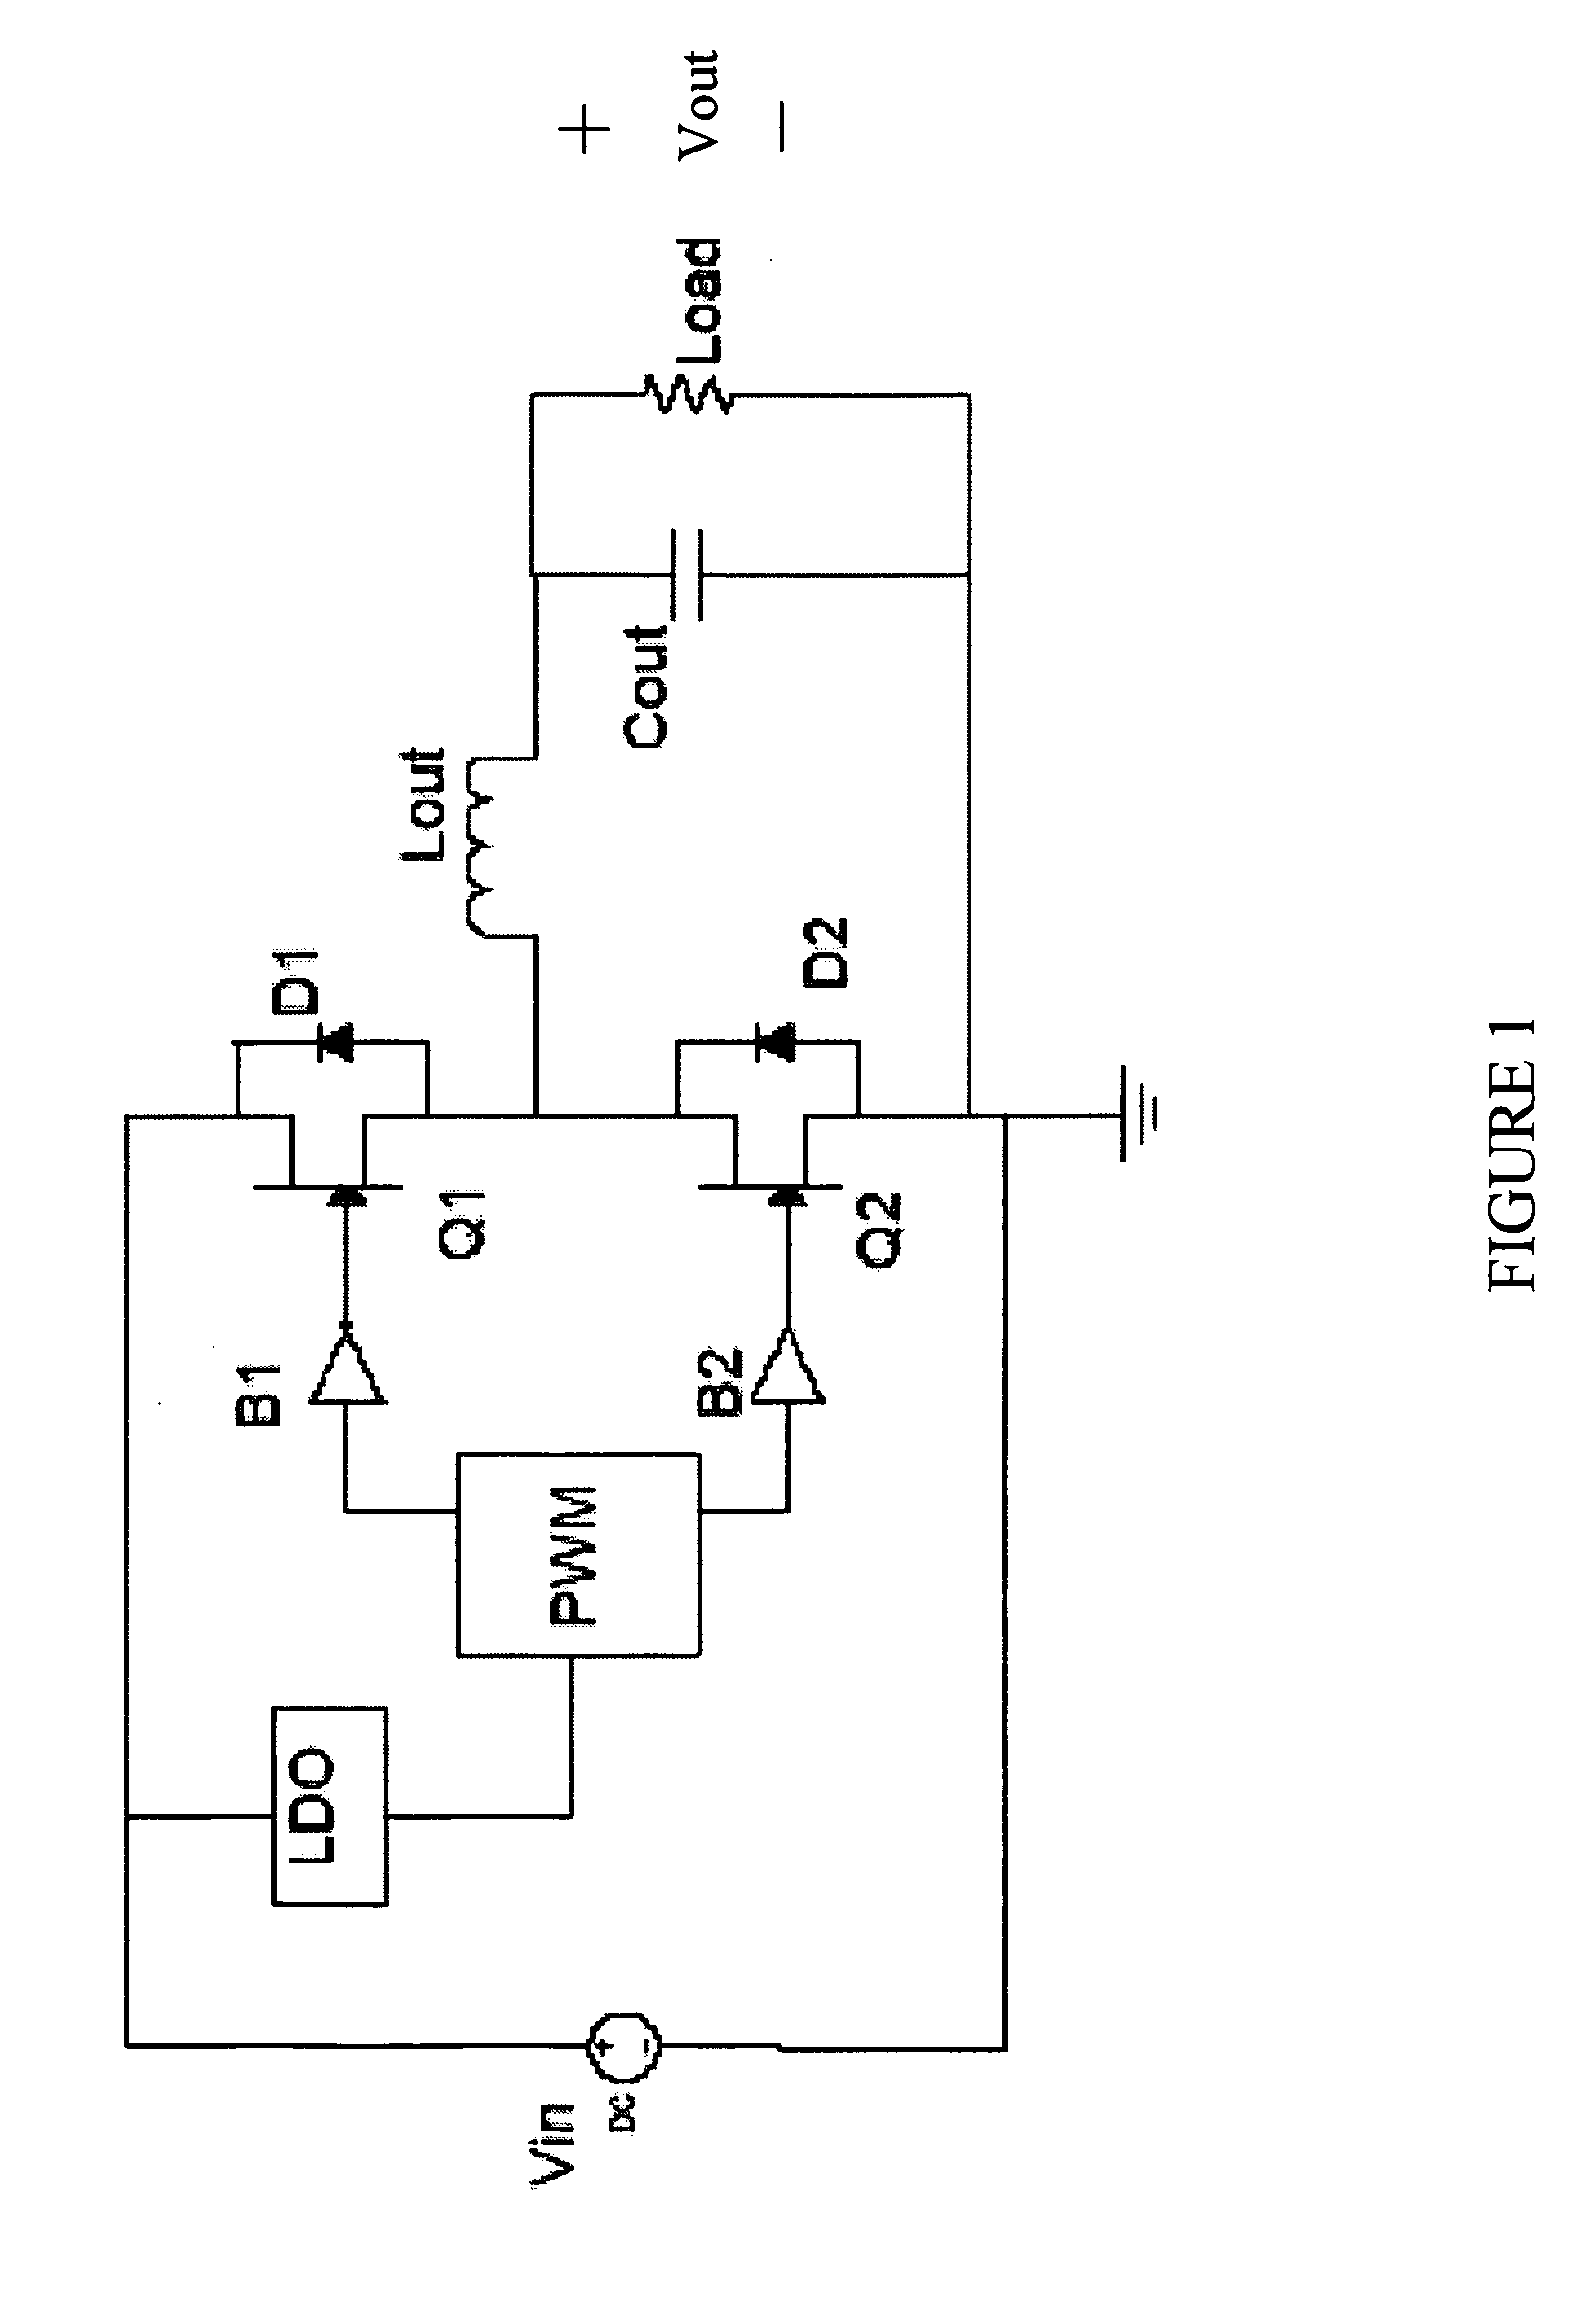 Control circuit for a depletion mode switch and method of operating the same